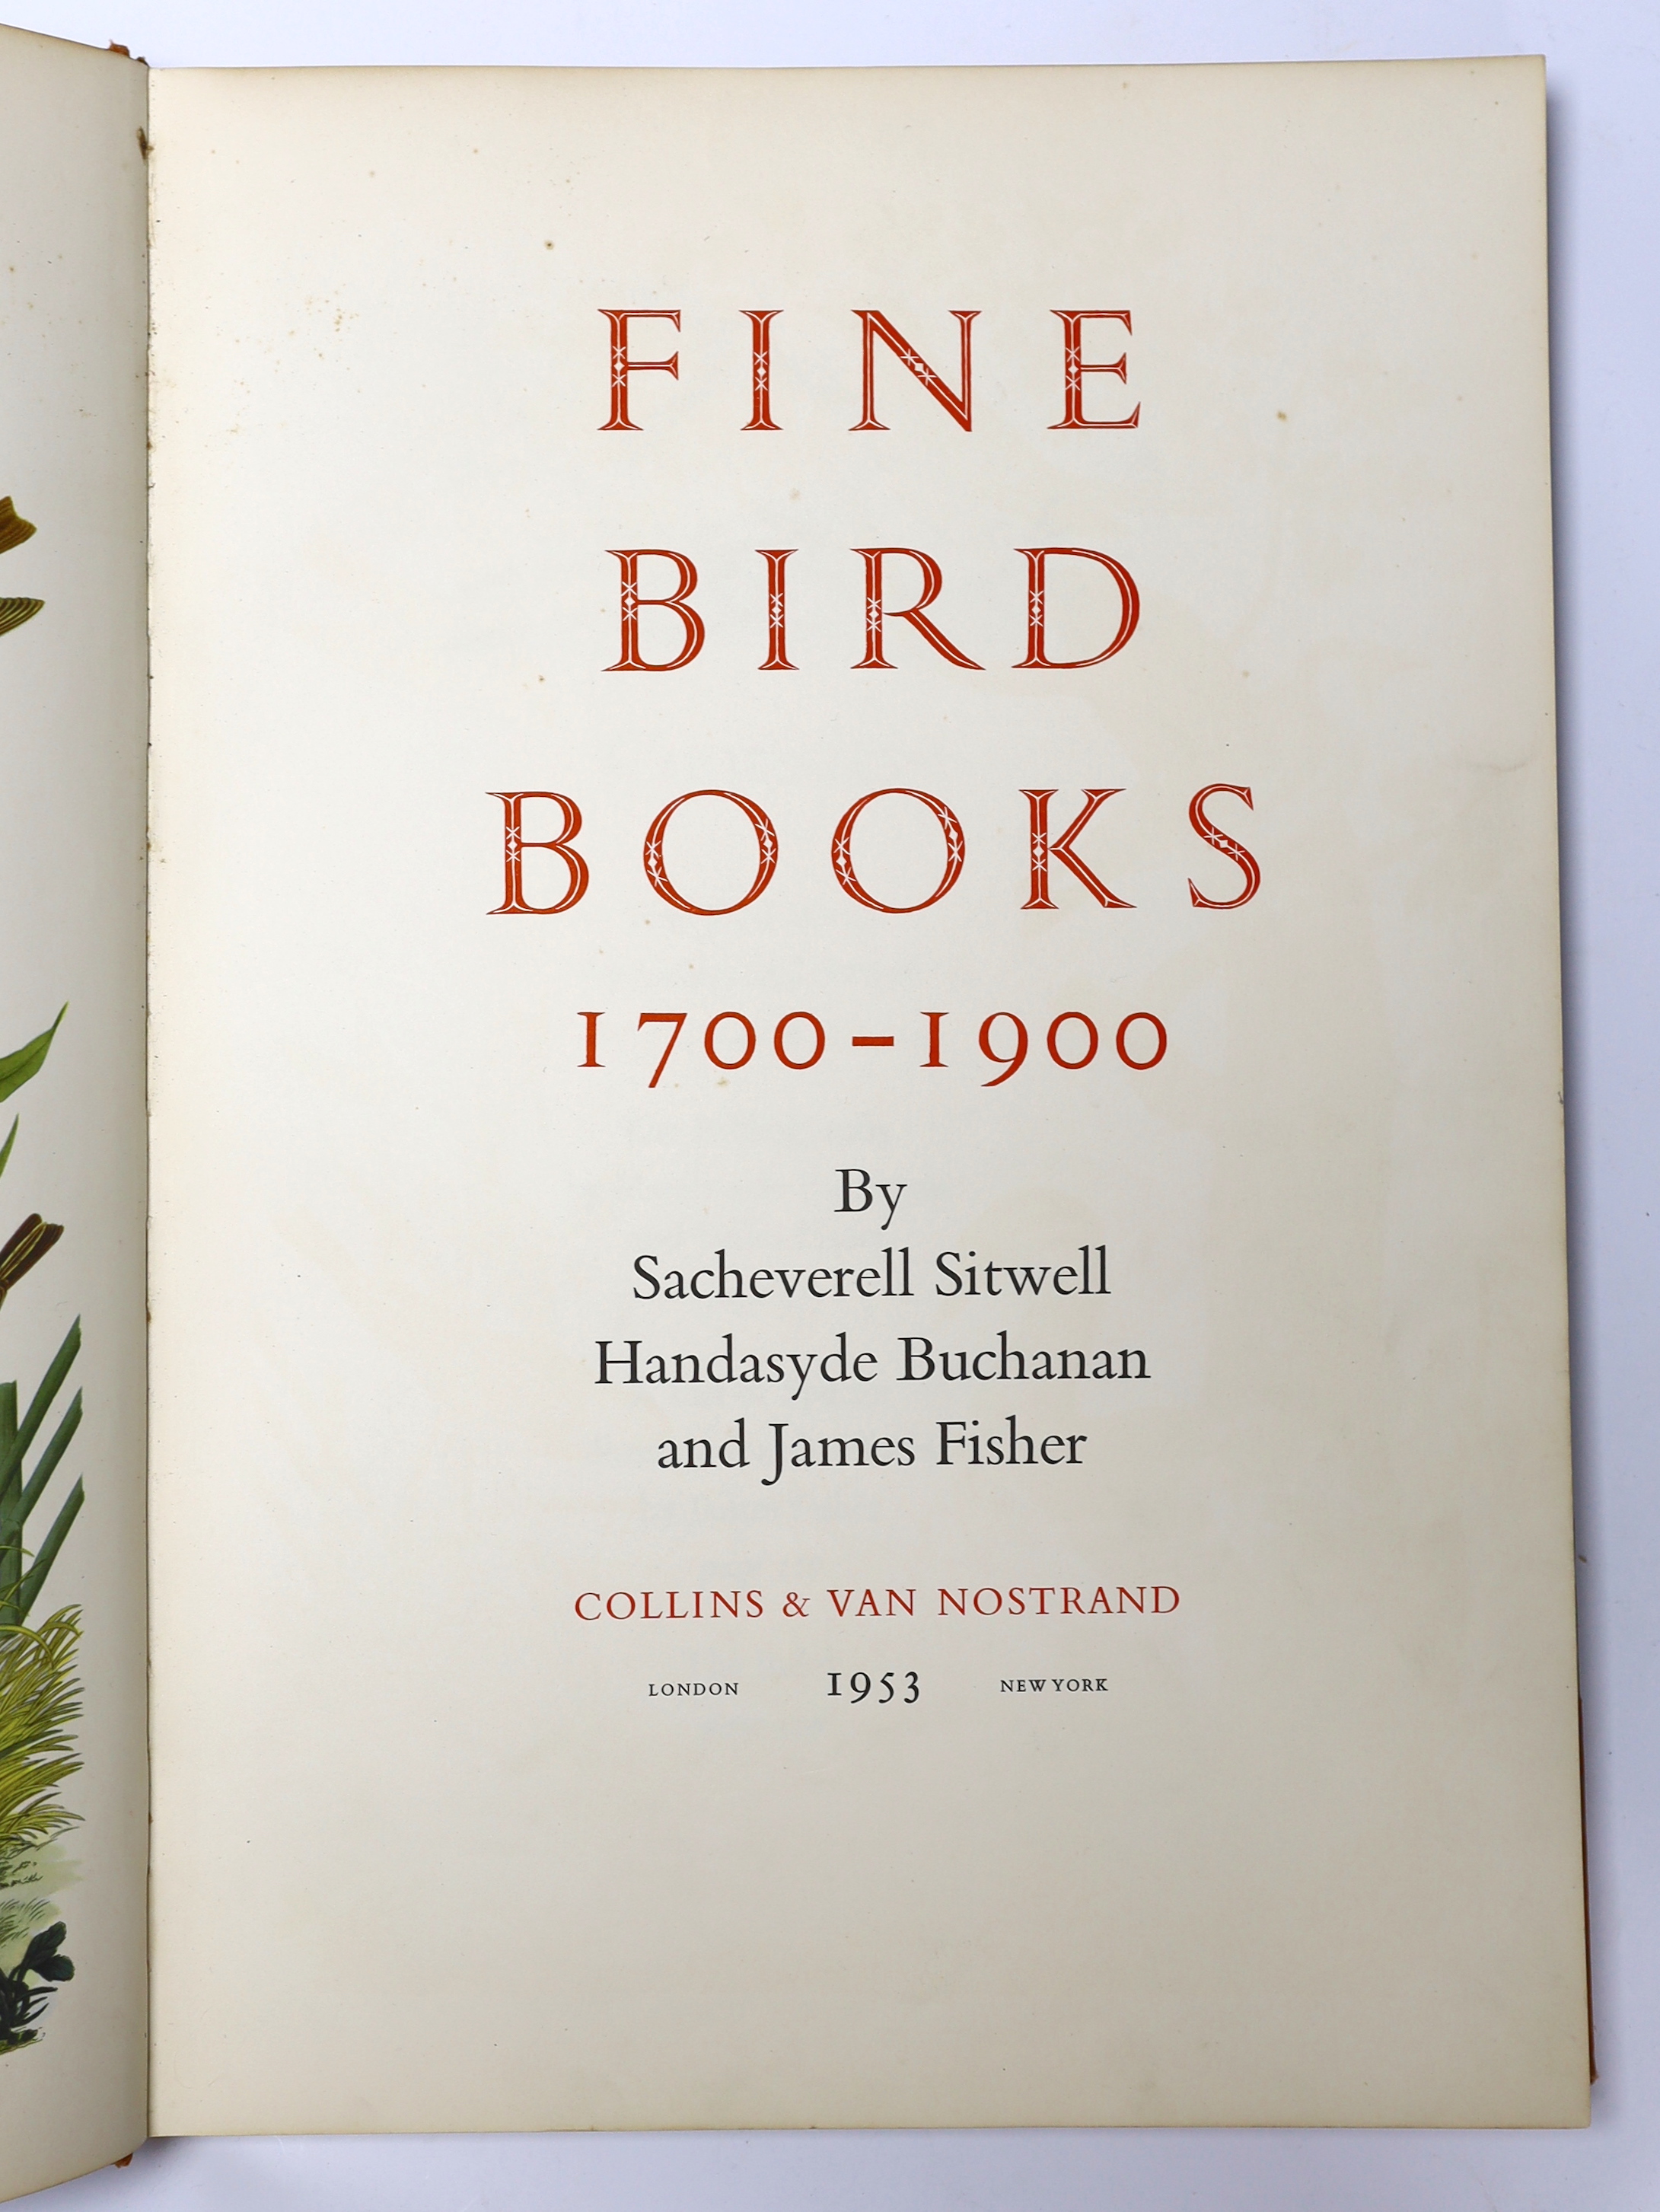 Sitwell, Sacheverell and others - Fine Bird Books, 1700-1900, one of 2000, folio, half cloth, with 16 colour plates (one folding), and 24 monochrome plates, Collins & Van Nostrand, London 1953